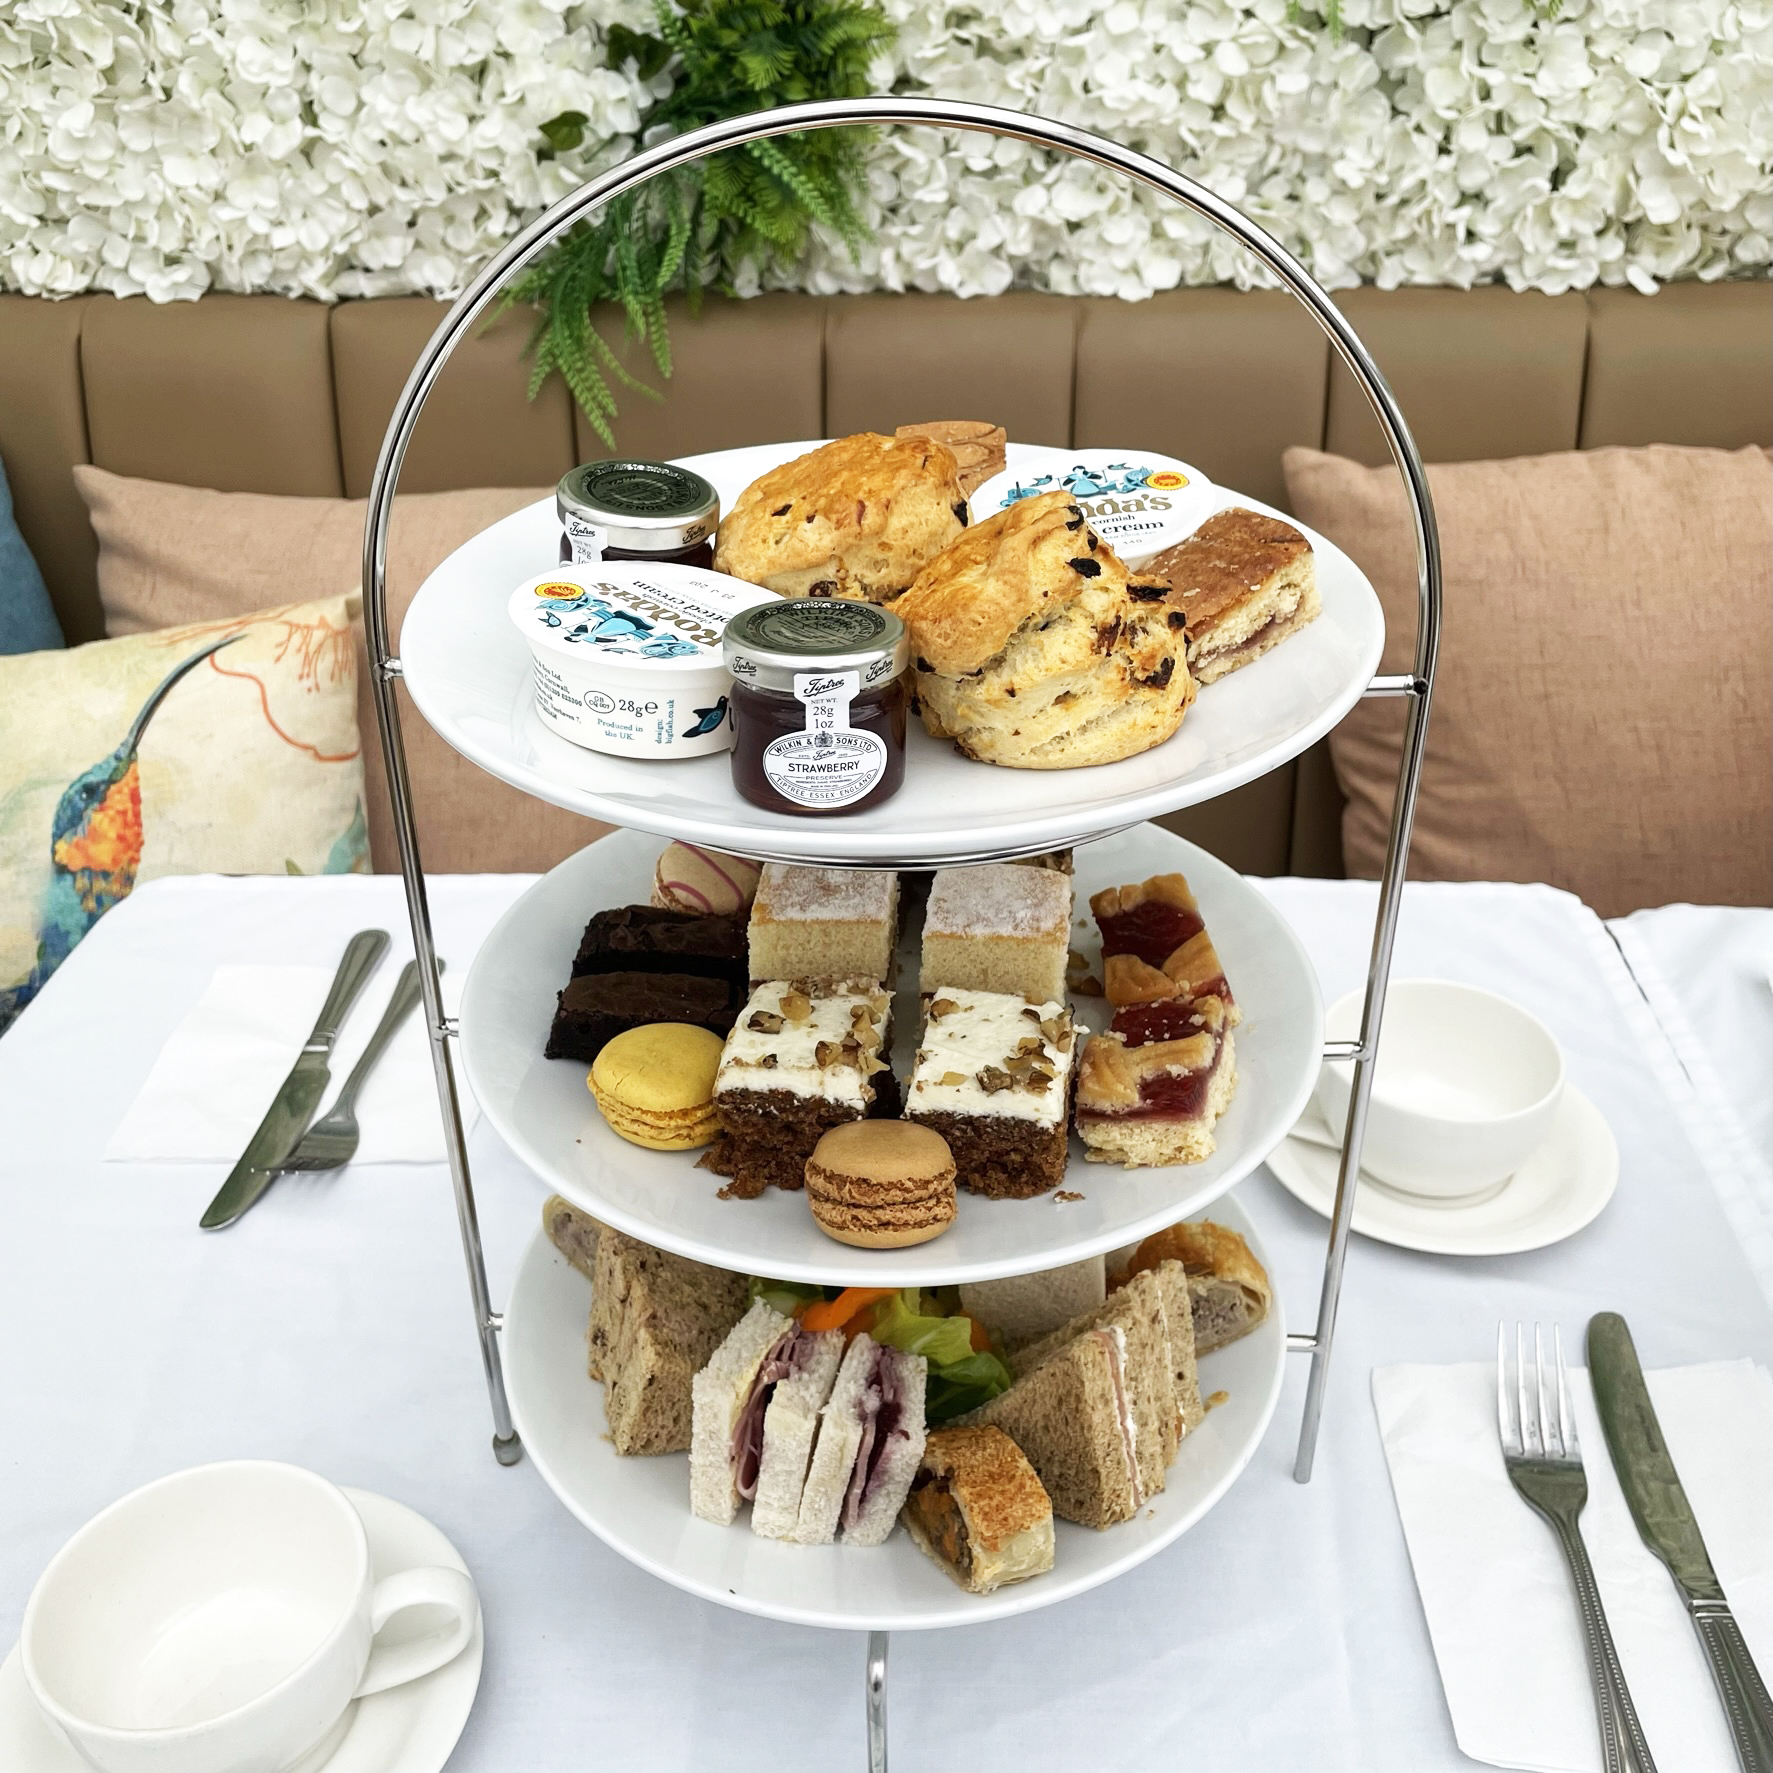 Visit The Arium for Afternoon Tea